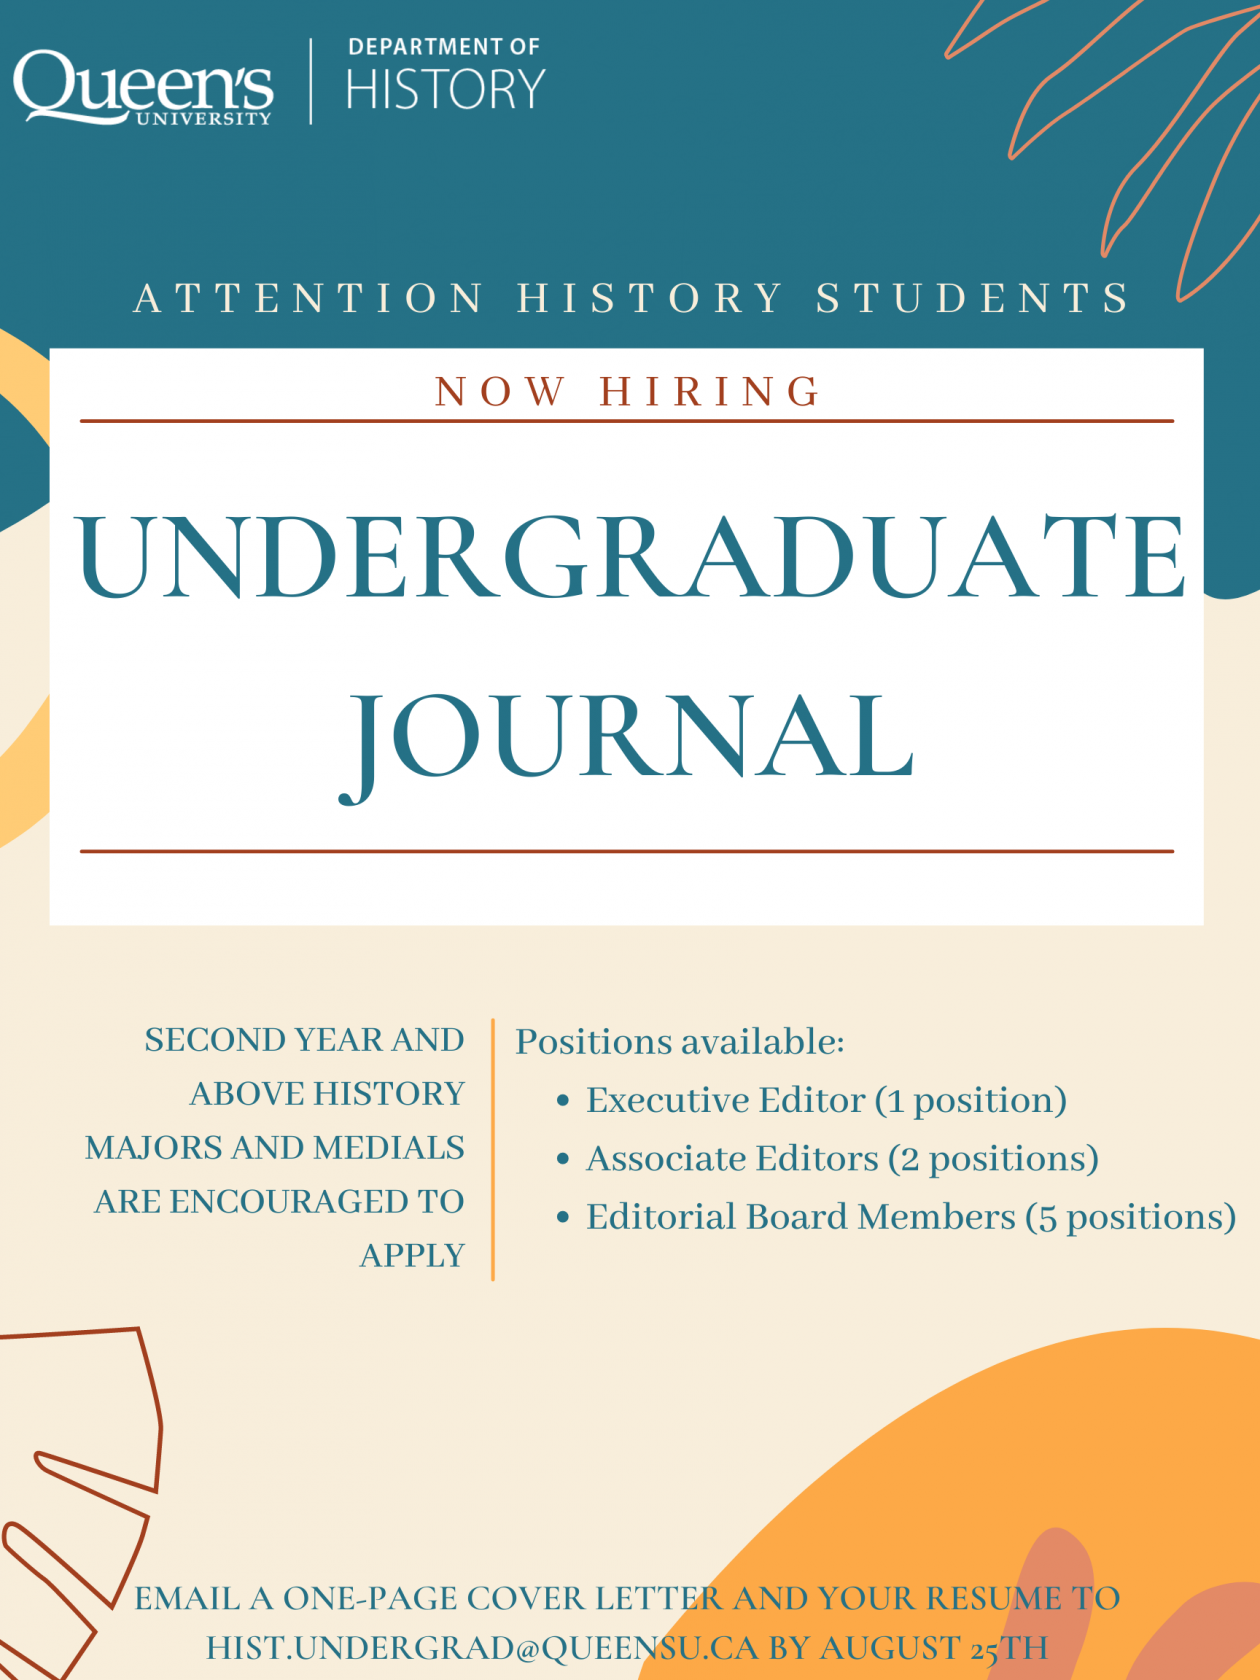 Poster of Undergraduate Journal positions